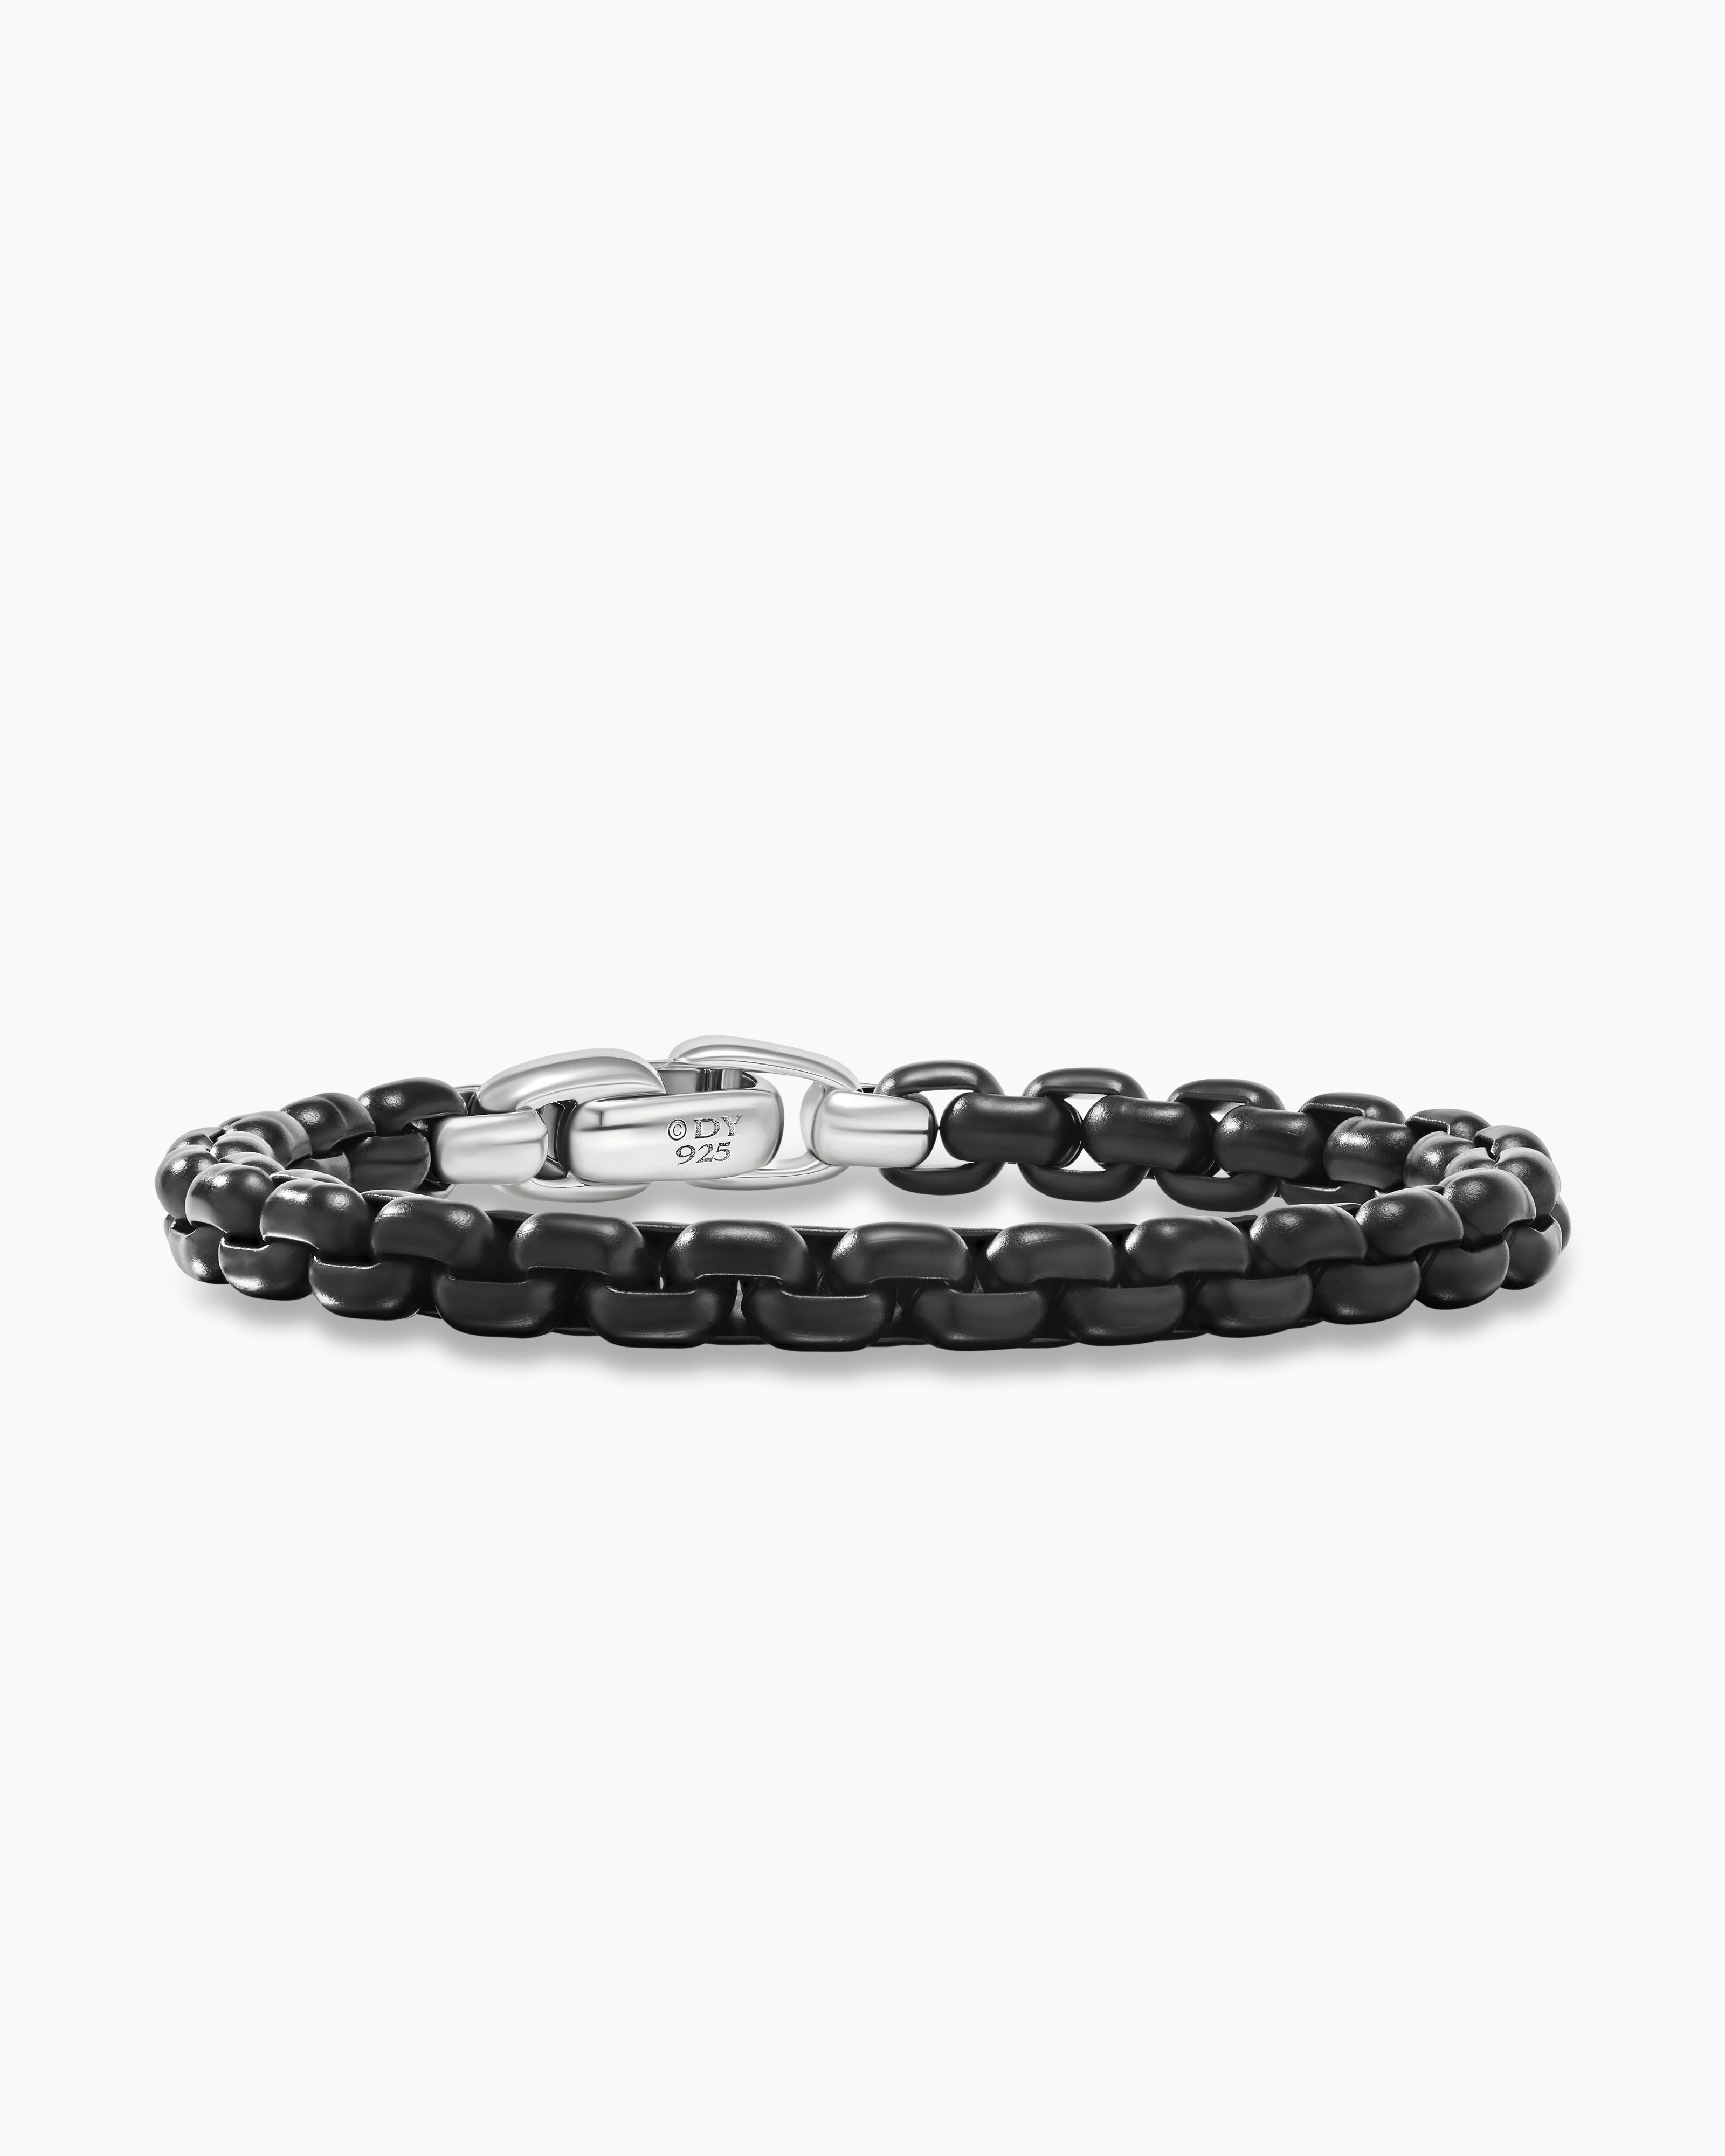 David Yurman Box Chain Bracelet with Stainless Steel and Sterling Silver, 7.3mm Men's Size Small